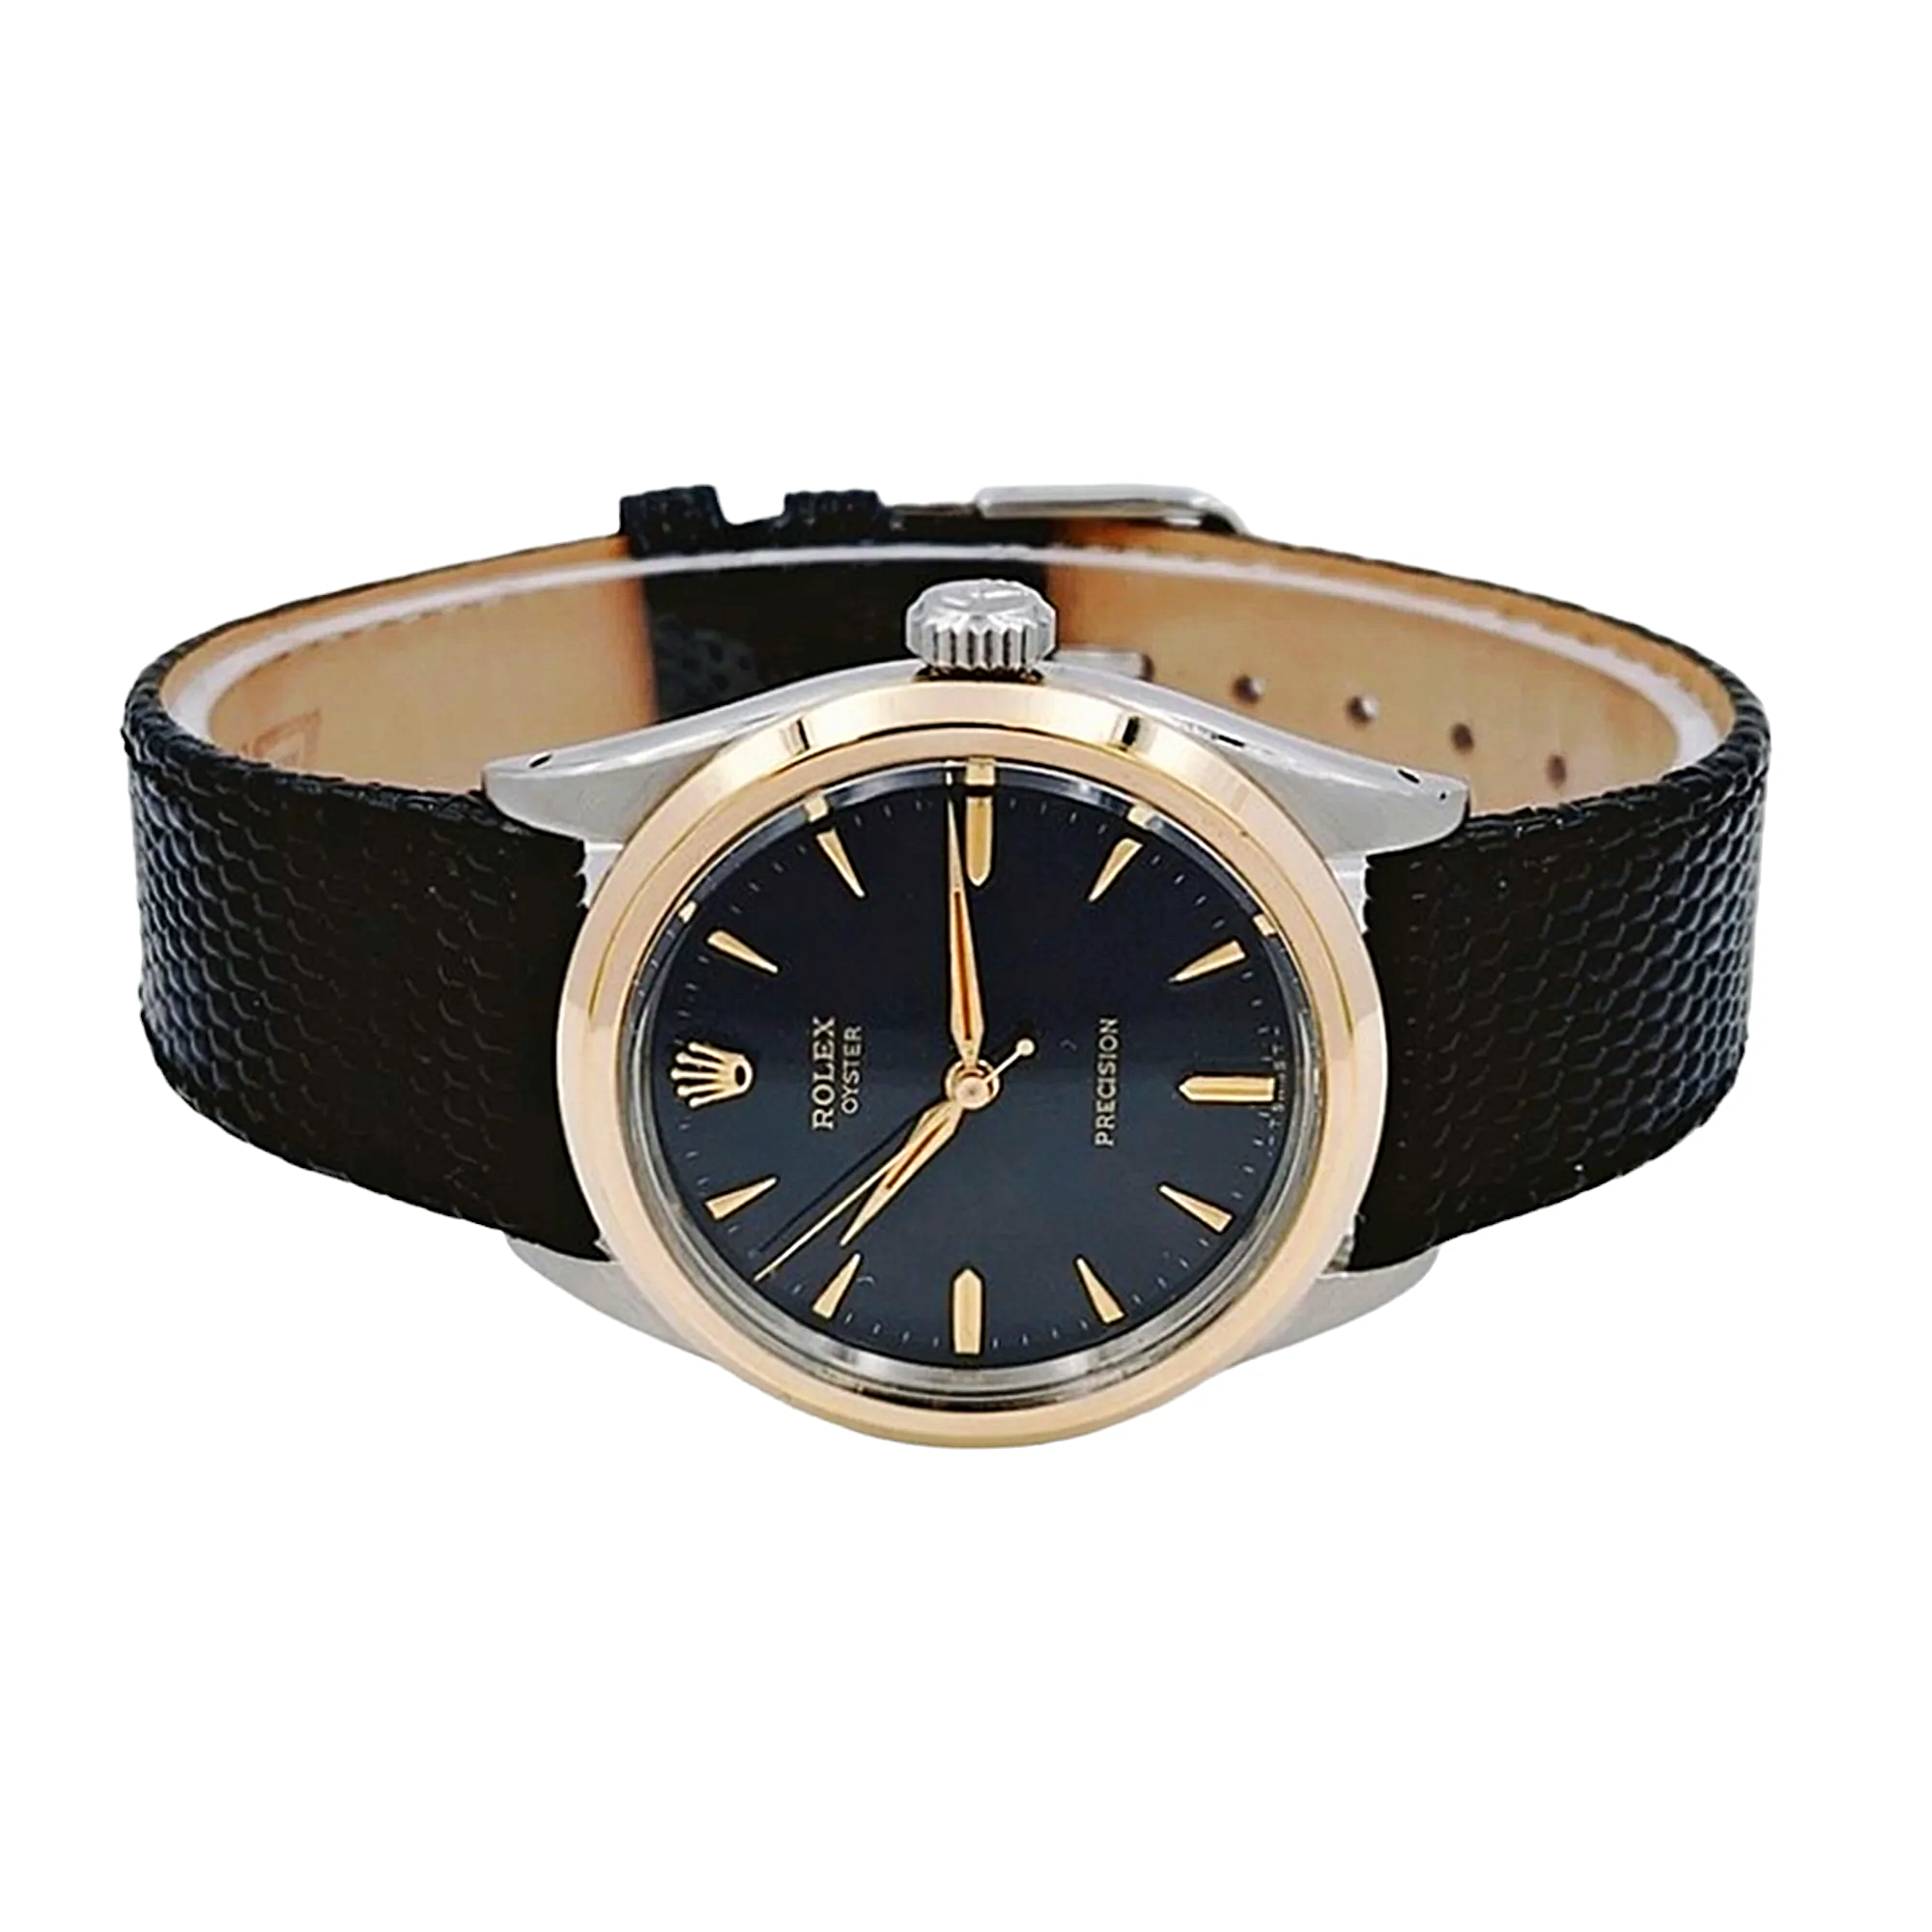 Men's Rolex 34mm Vintage Brevet 1955 Oyster Precision Two Tone Watch with Black Leather Strap and Black Dial. (Pre-Owned 6424)